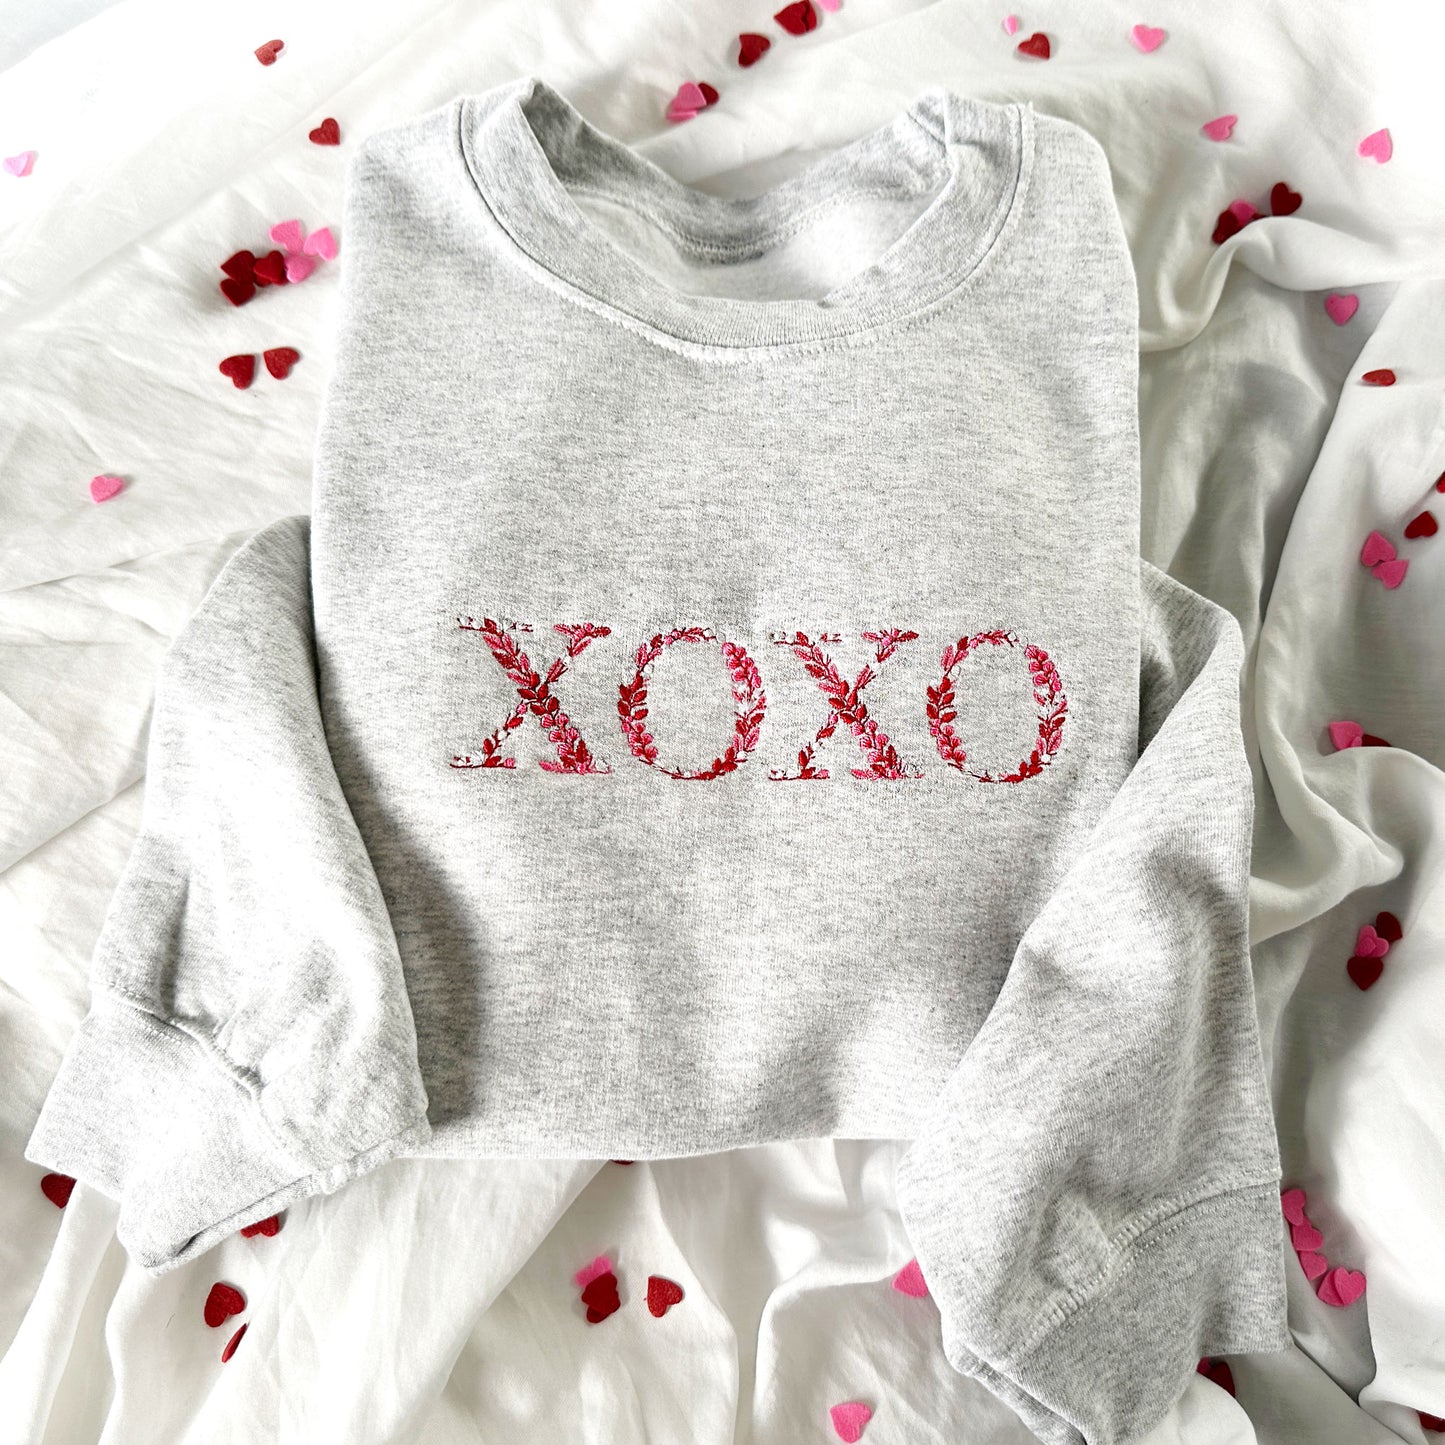 Ash crewneck sweatshirt with xoxo floral embroidered design in red, pink, and white threads